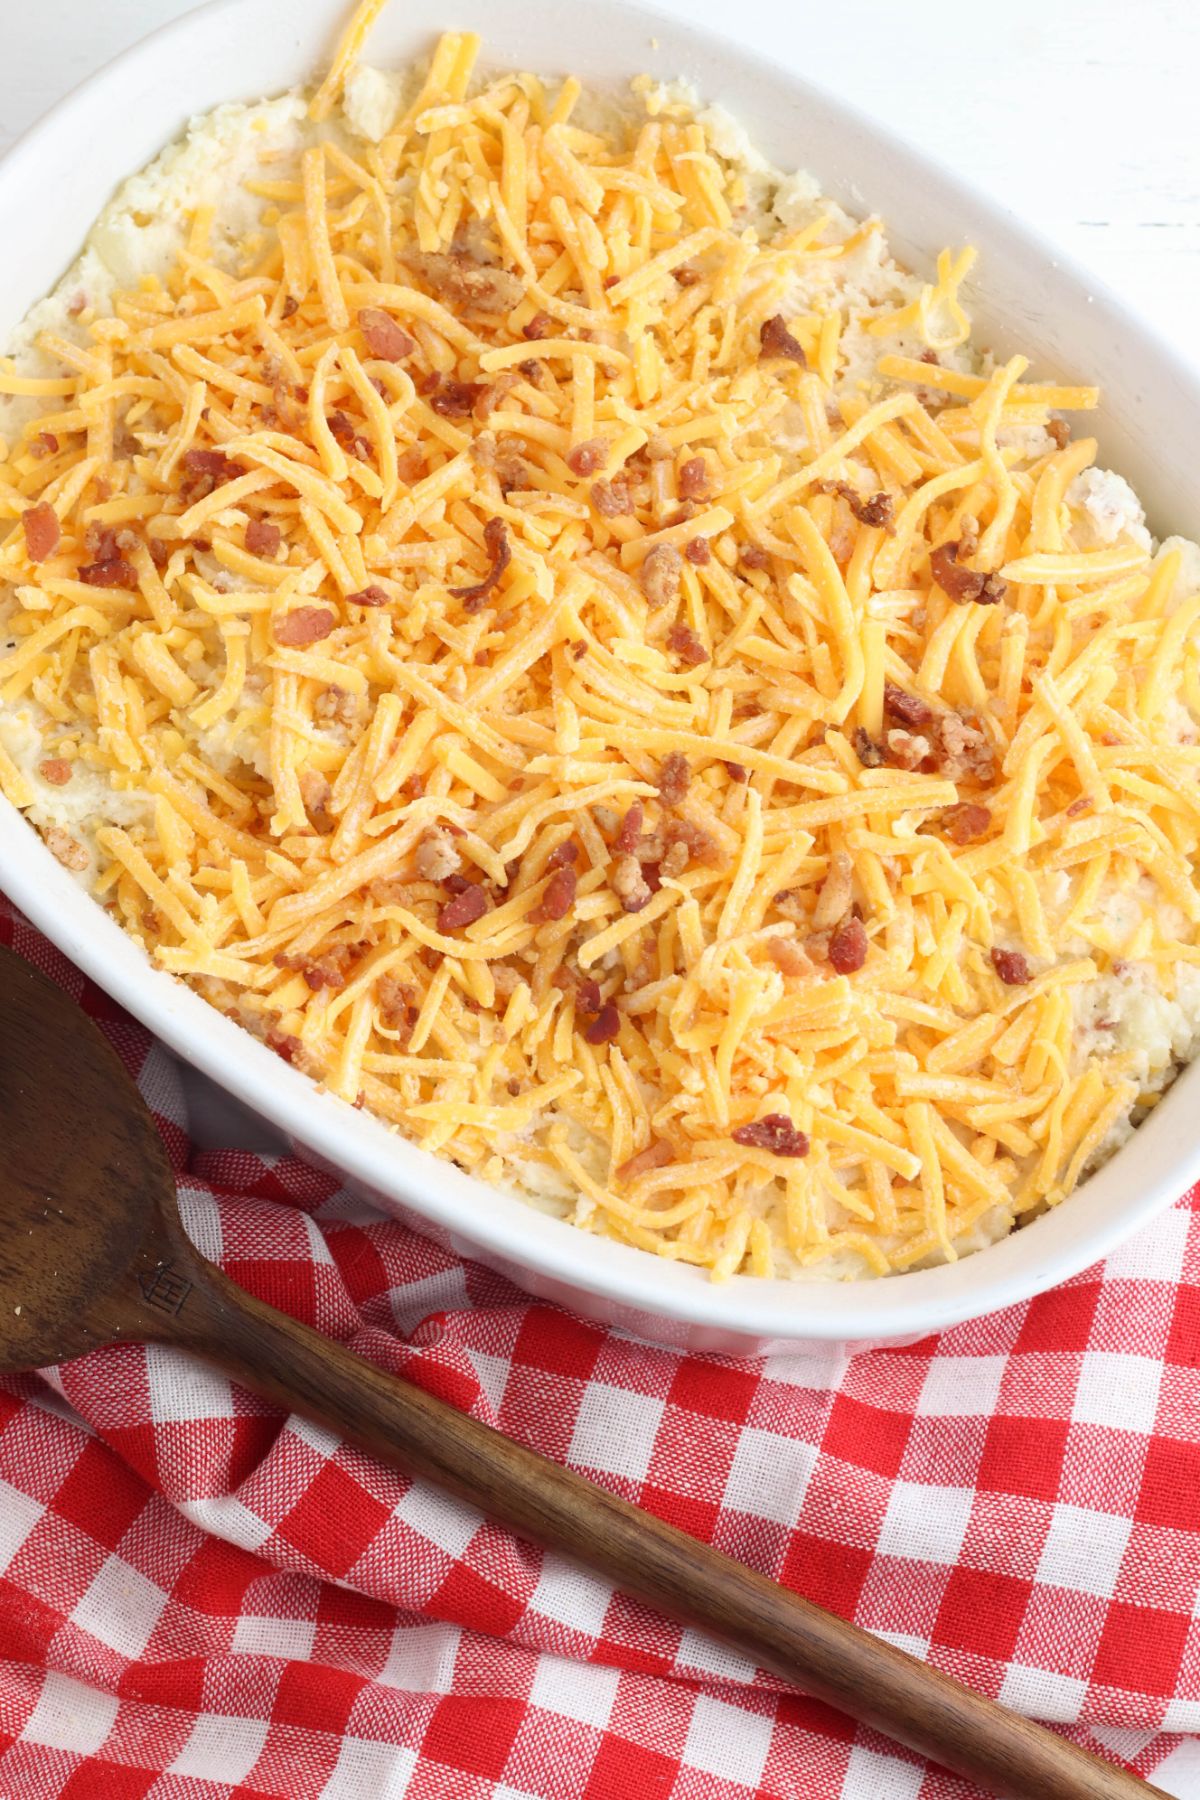 Potato mixture in the casserole dish topped with shredded cheese and bacon.